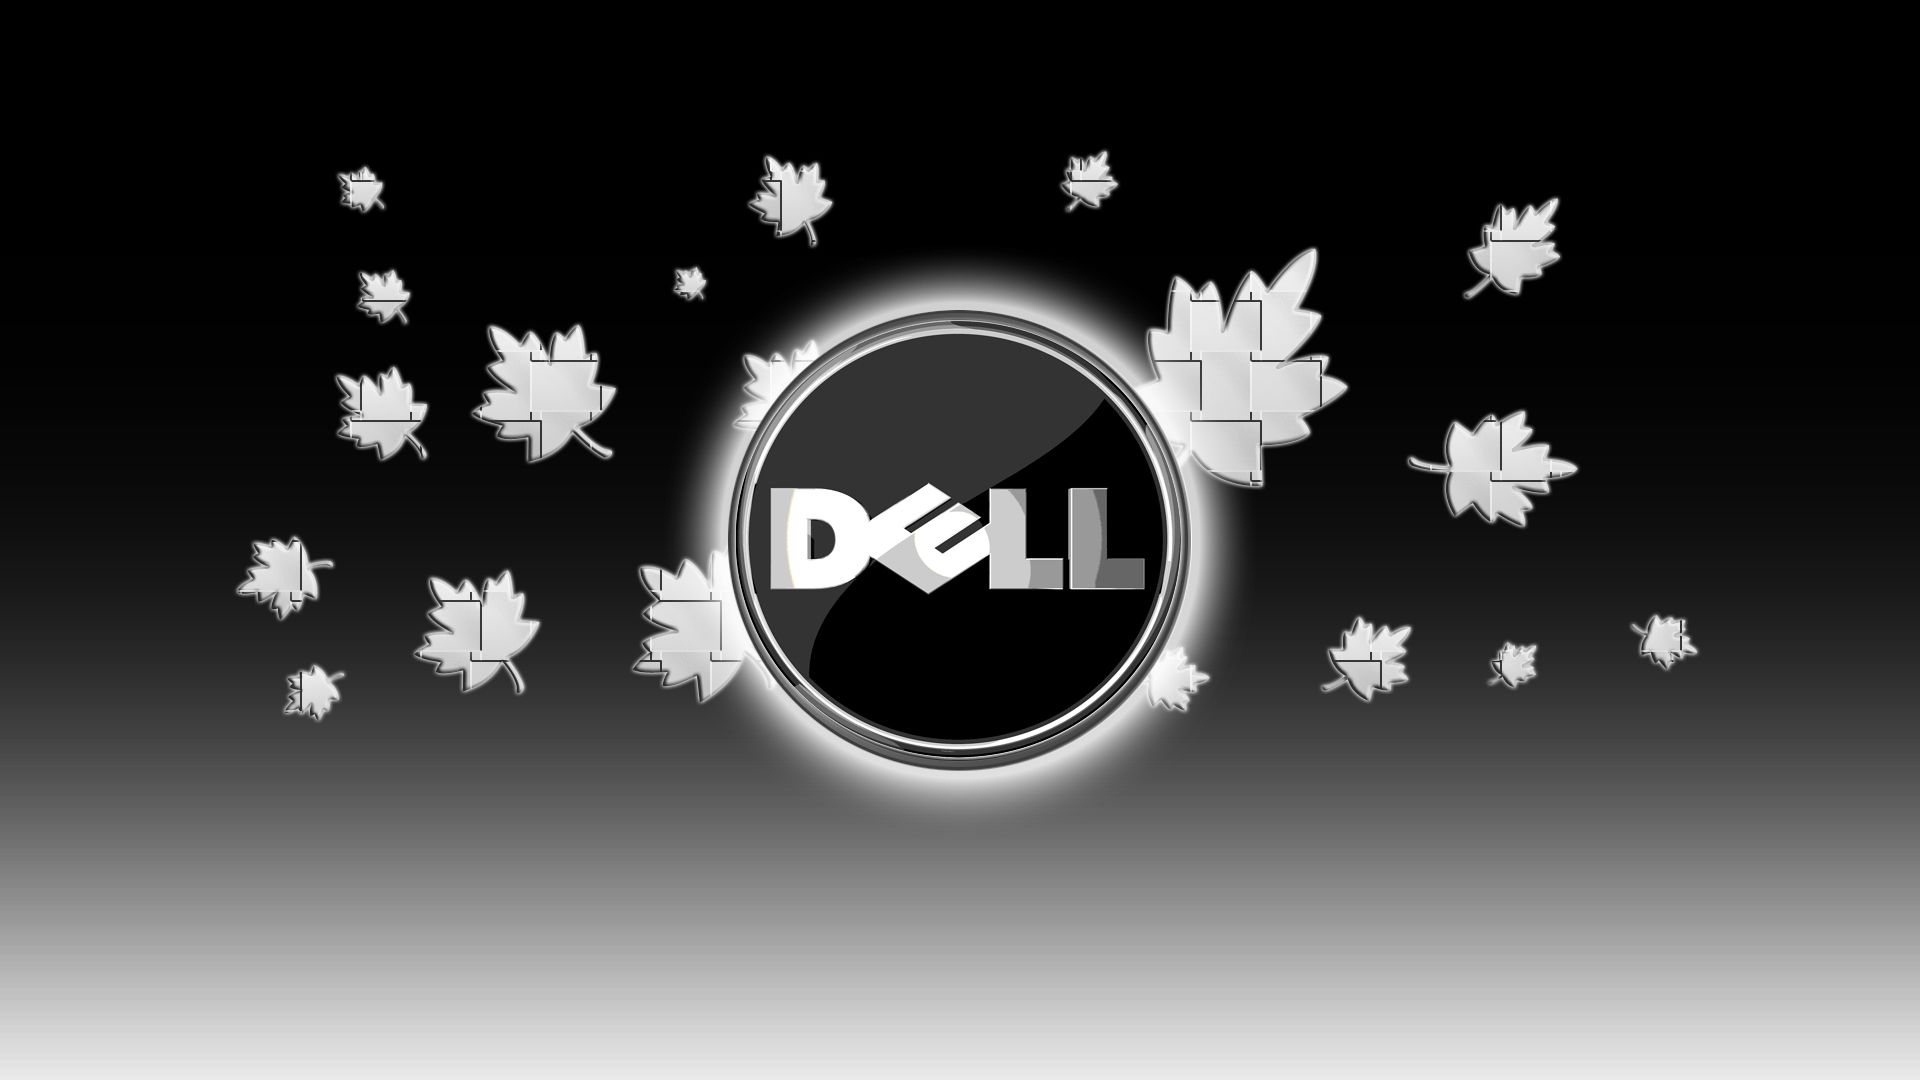 HD Dell Wallpapers | Full HD Pictures